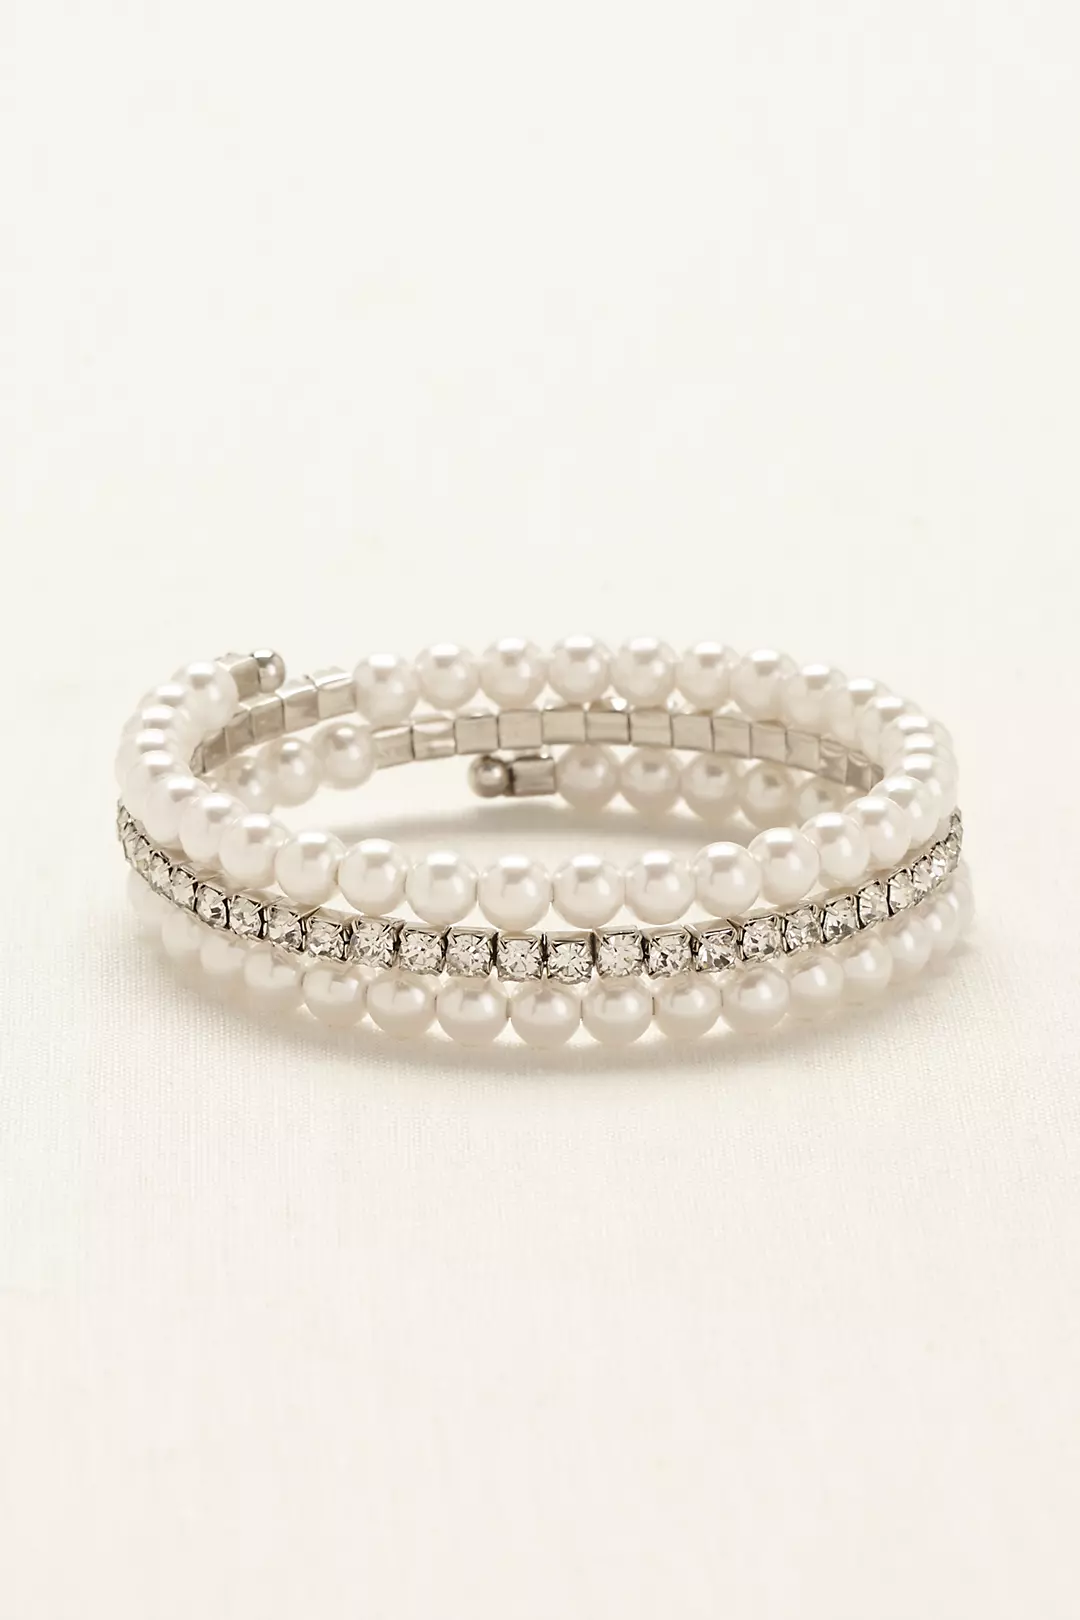 Pearl and Crystal Coil Wrap Bracelet Image